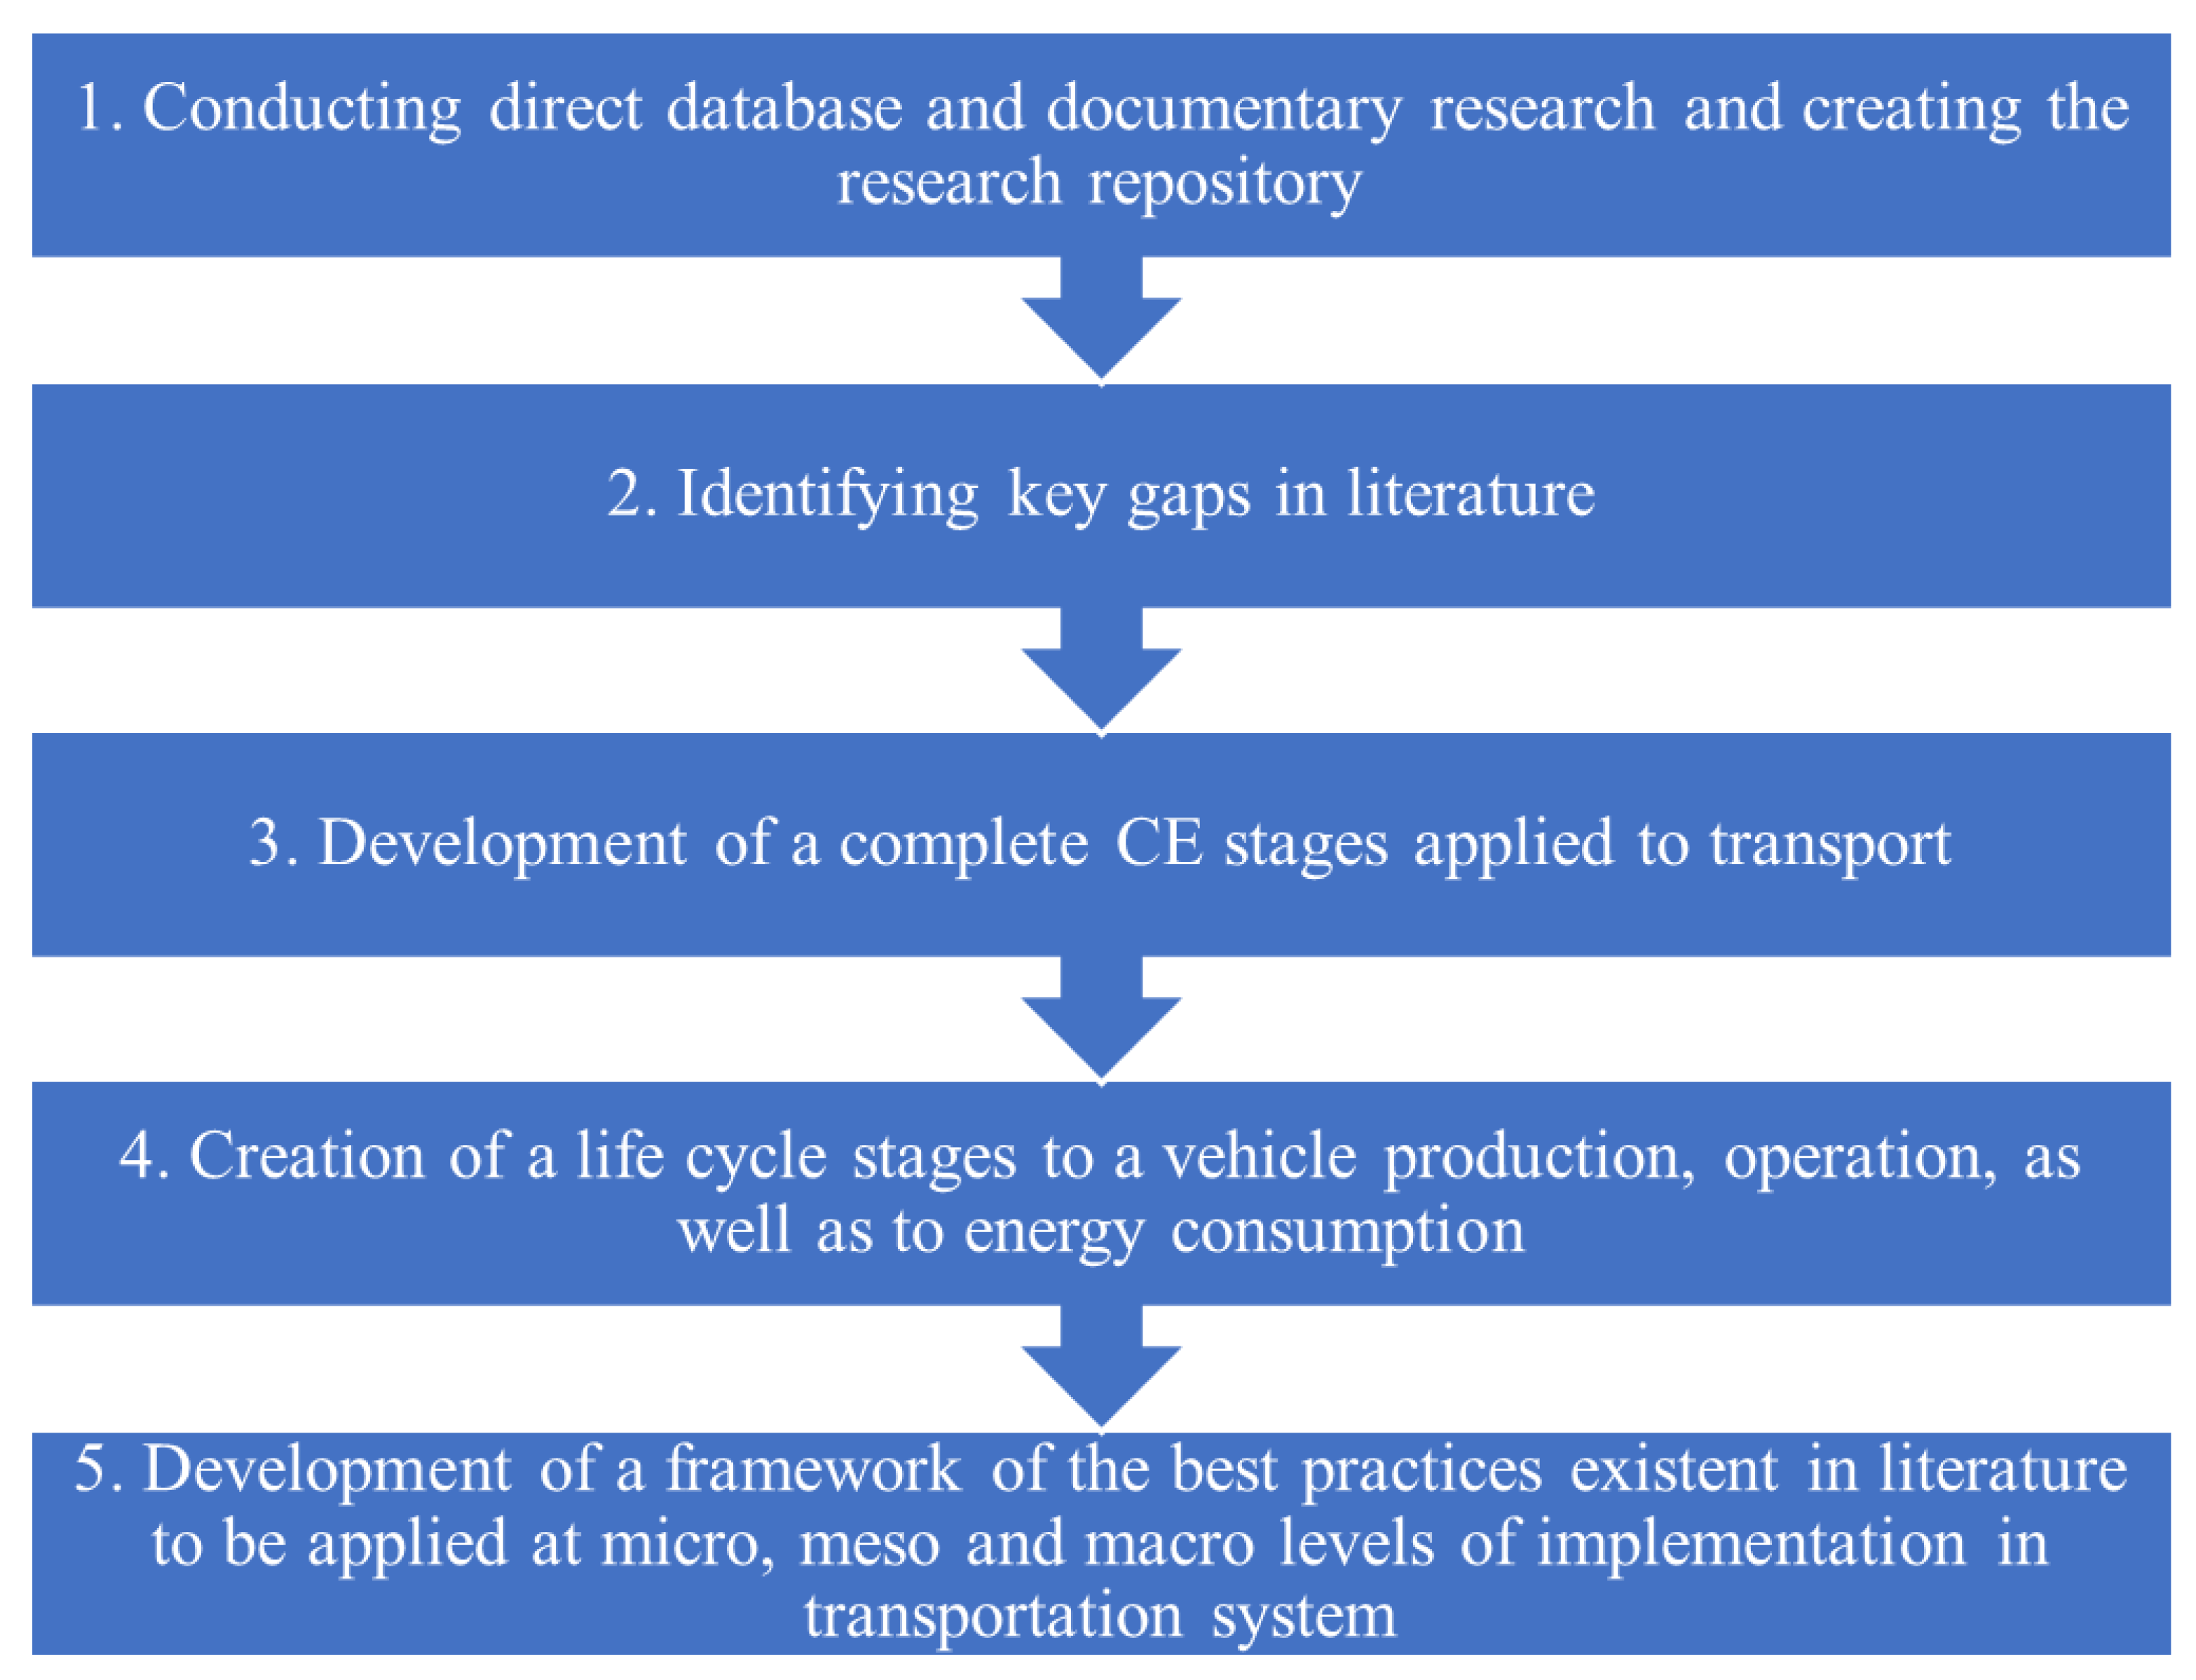 Sustainability   Free Full Text   The Role of the Circular Economy